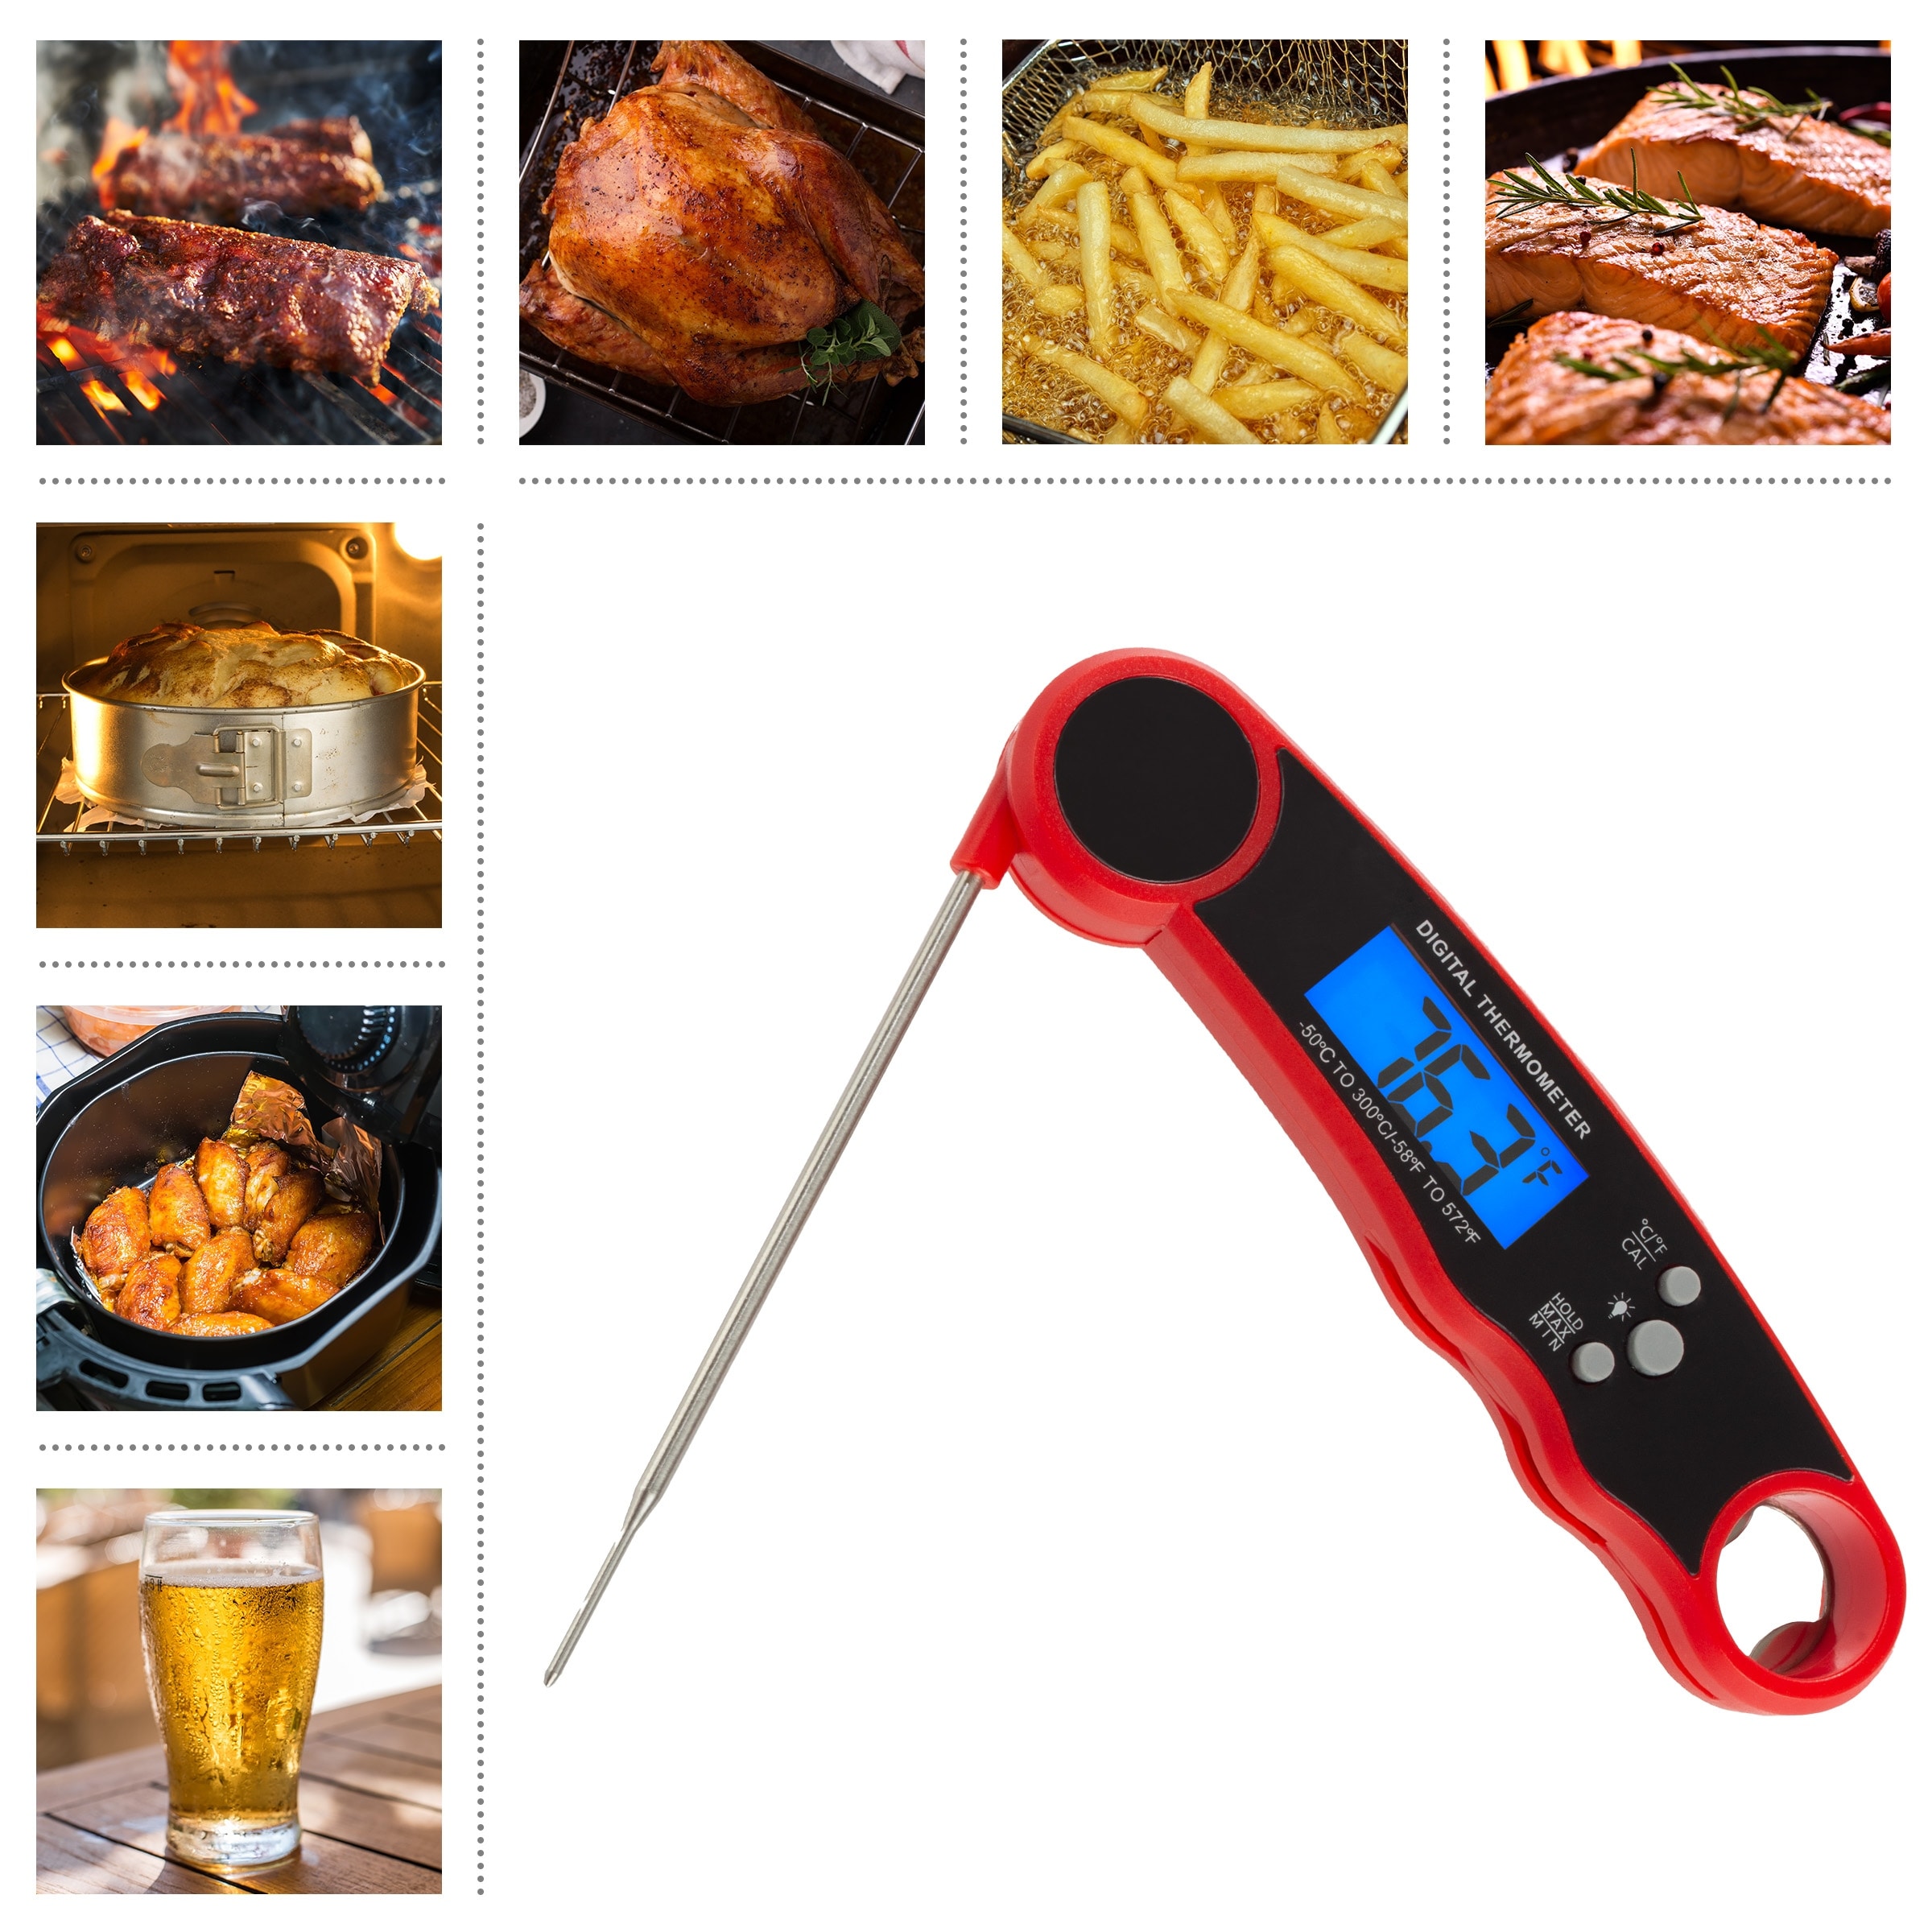 1pc Candy Deep Fry Thermometer with Pot Clip 8 - Instant Read